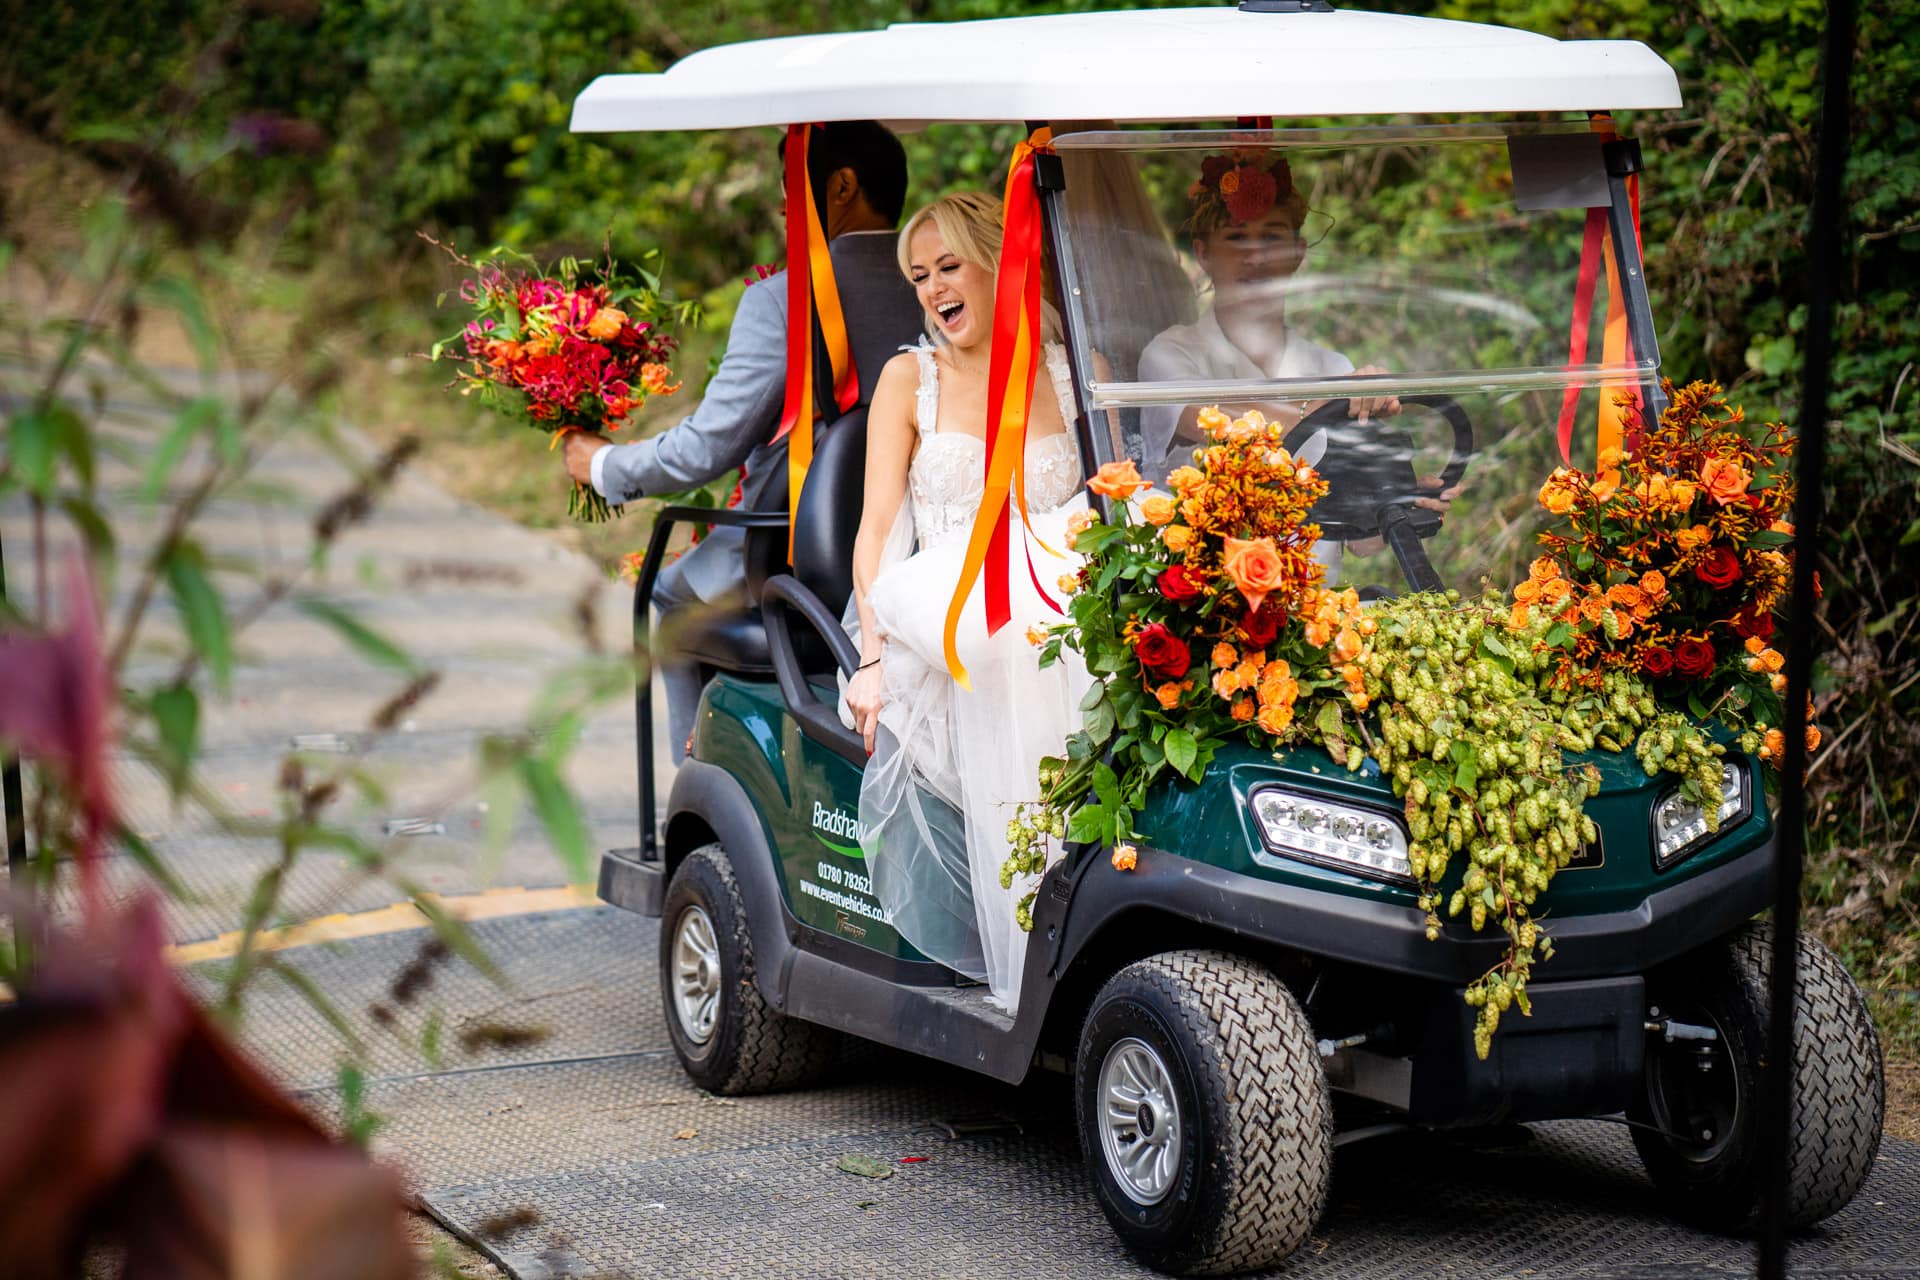 brie arriving on golf cart